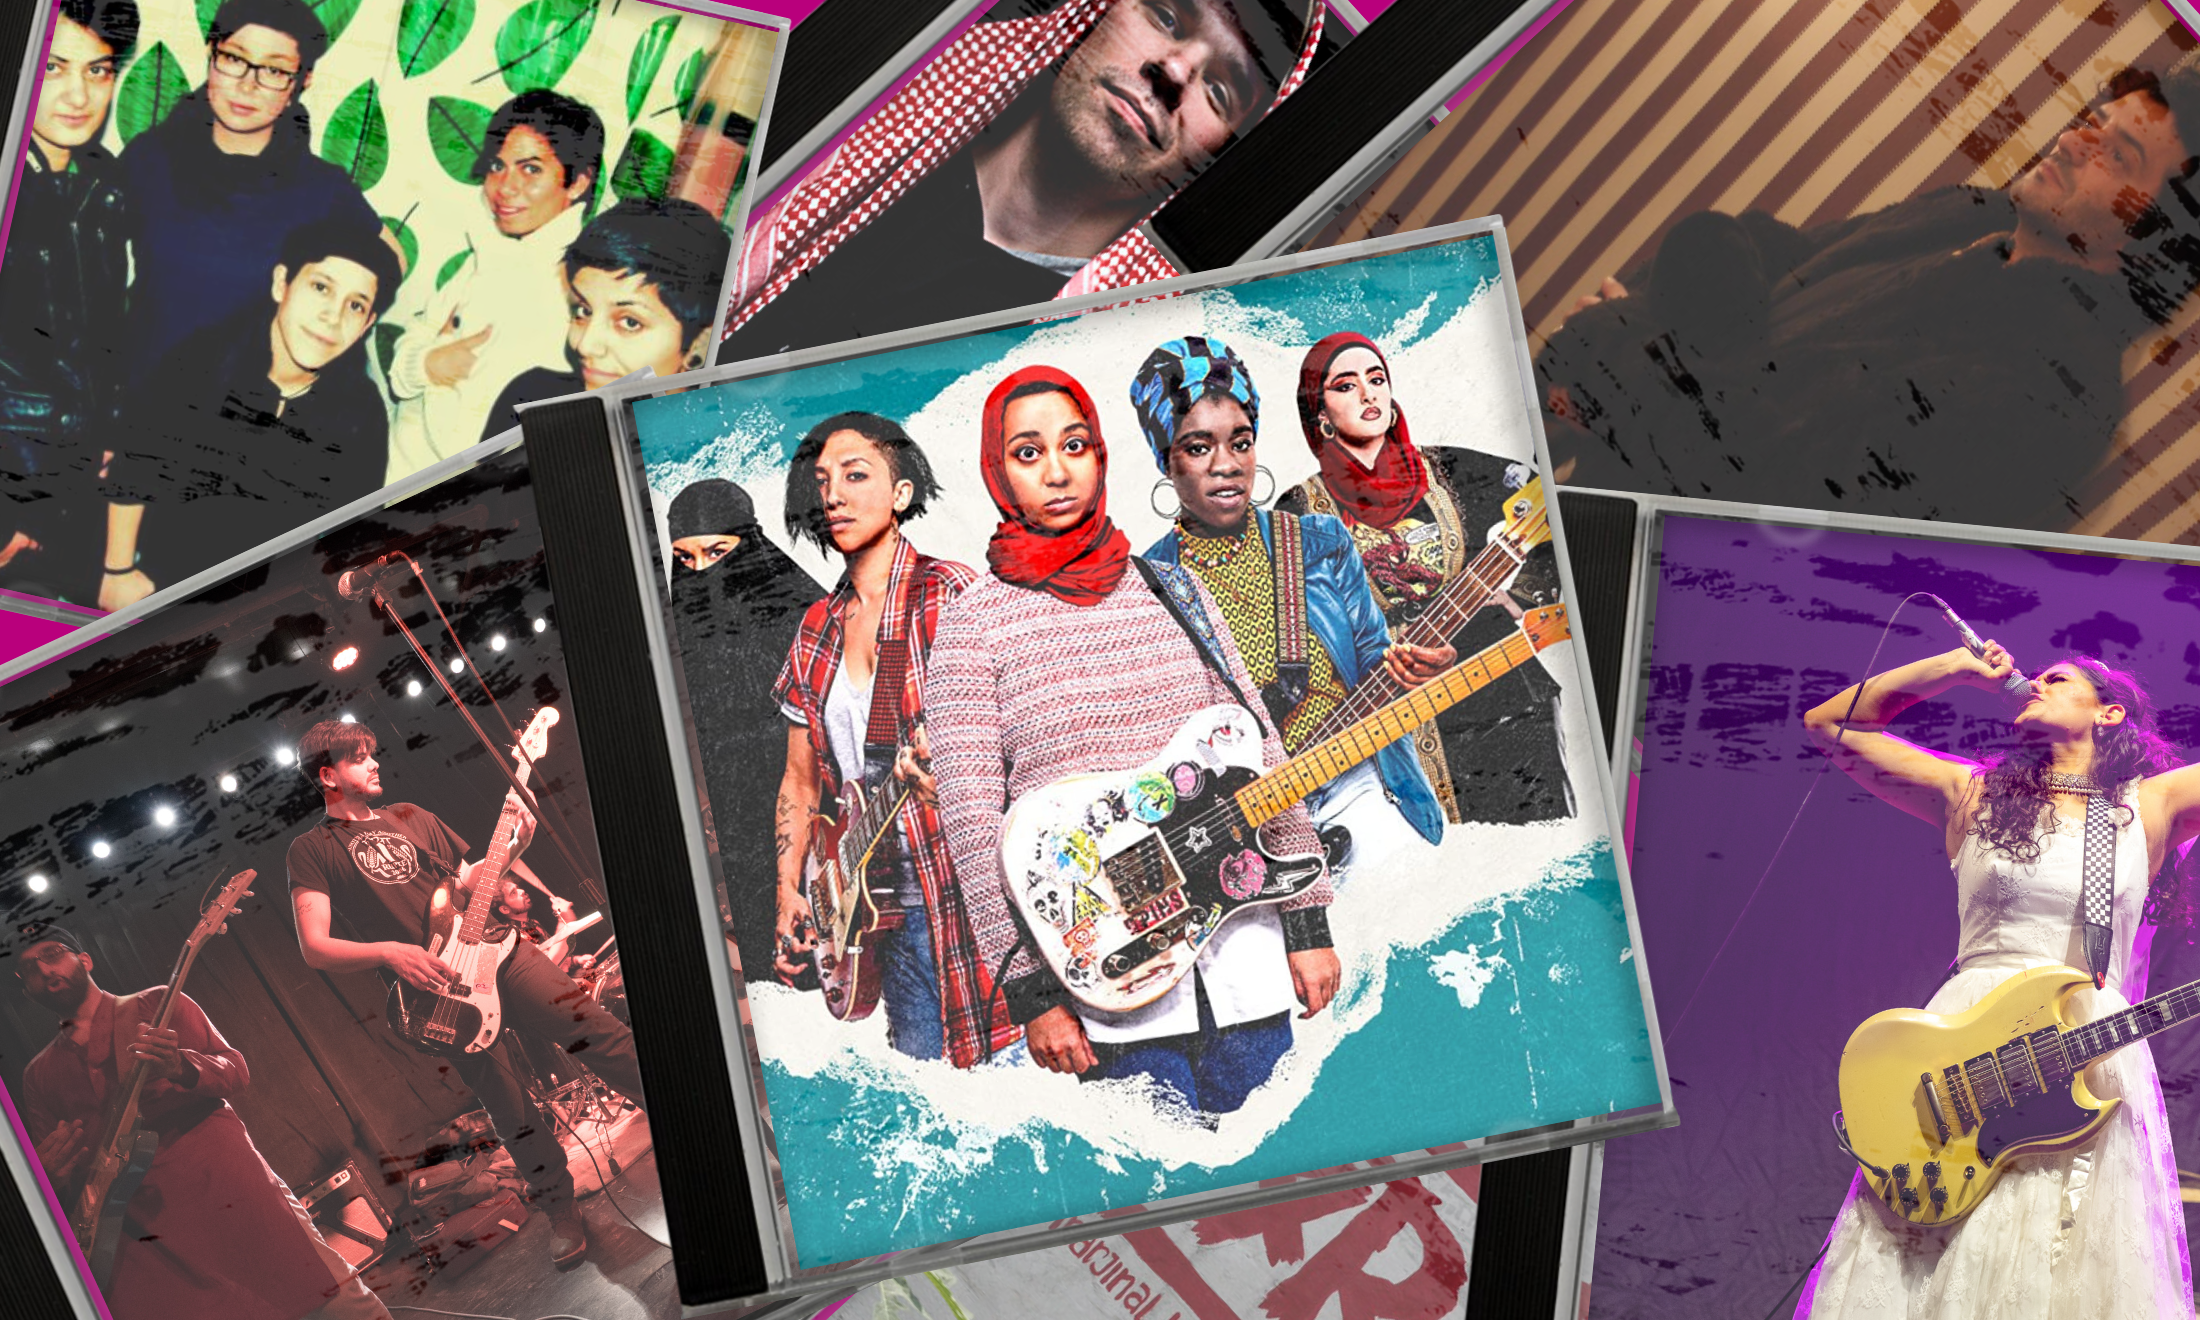 We Are Lady Parts reminds us to celebrate real Muslim punk stories too